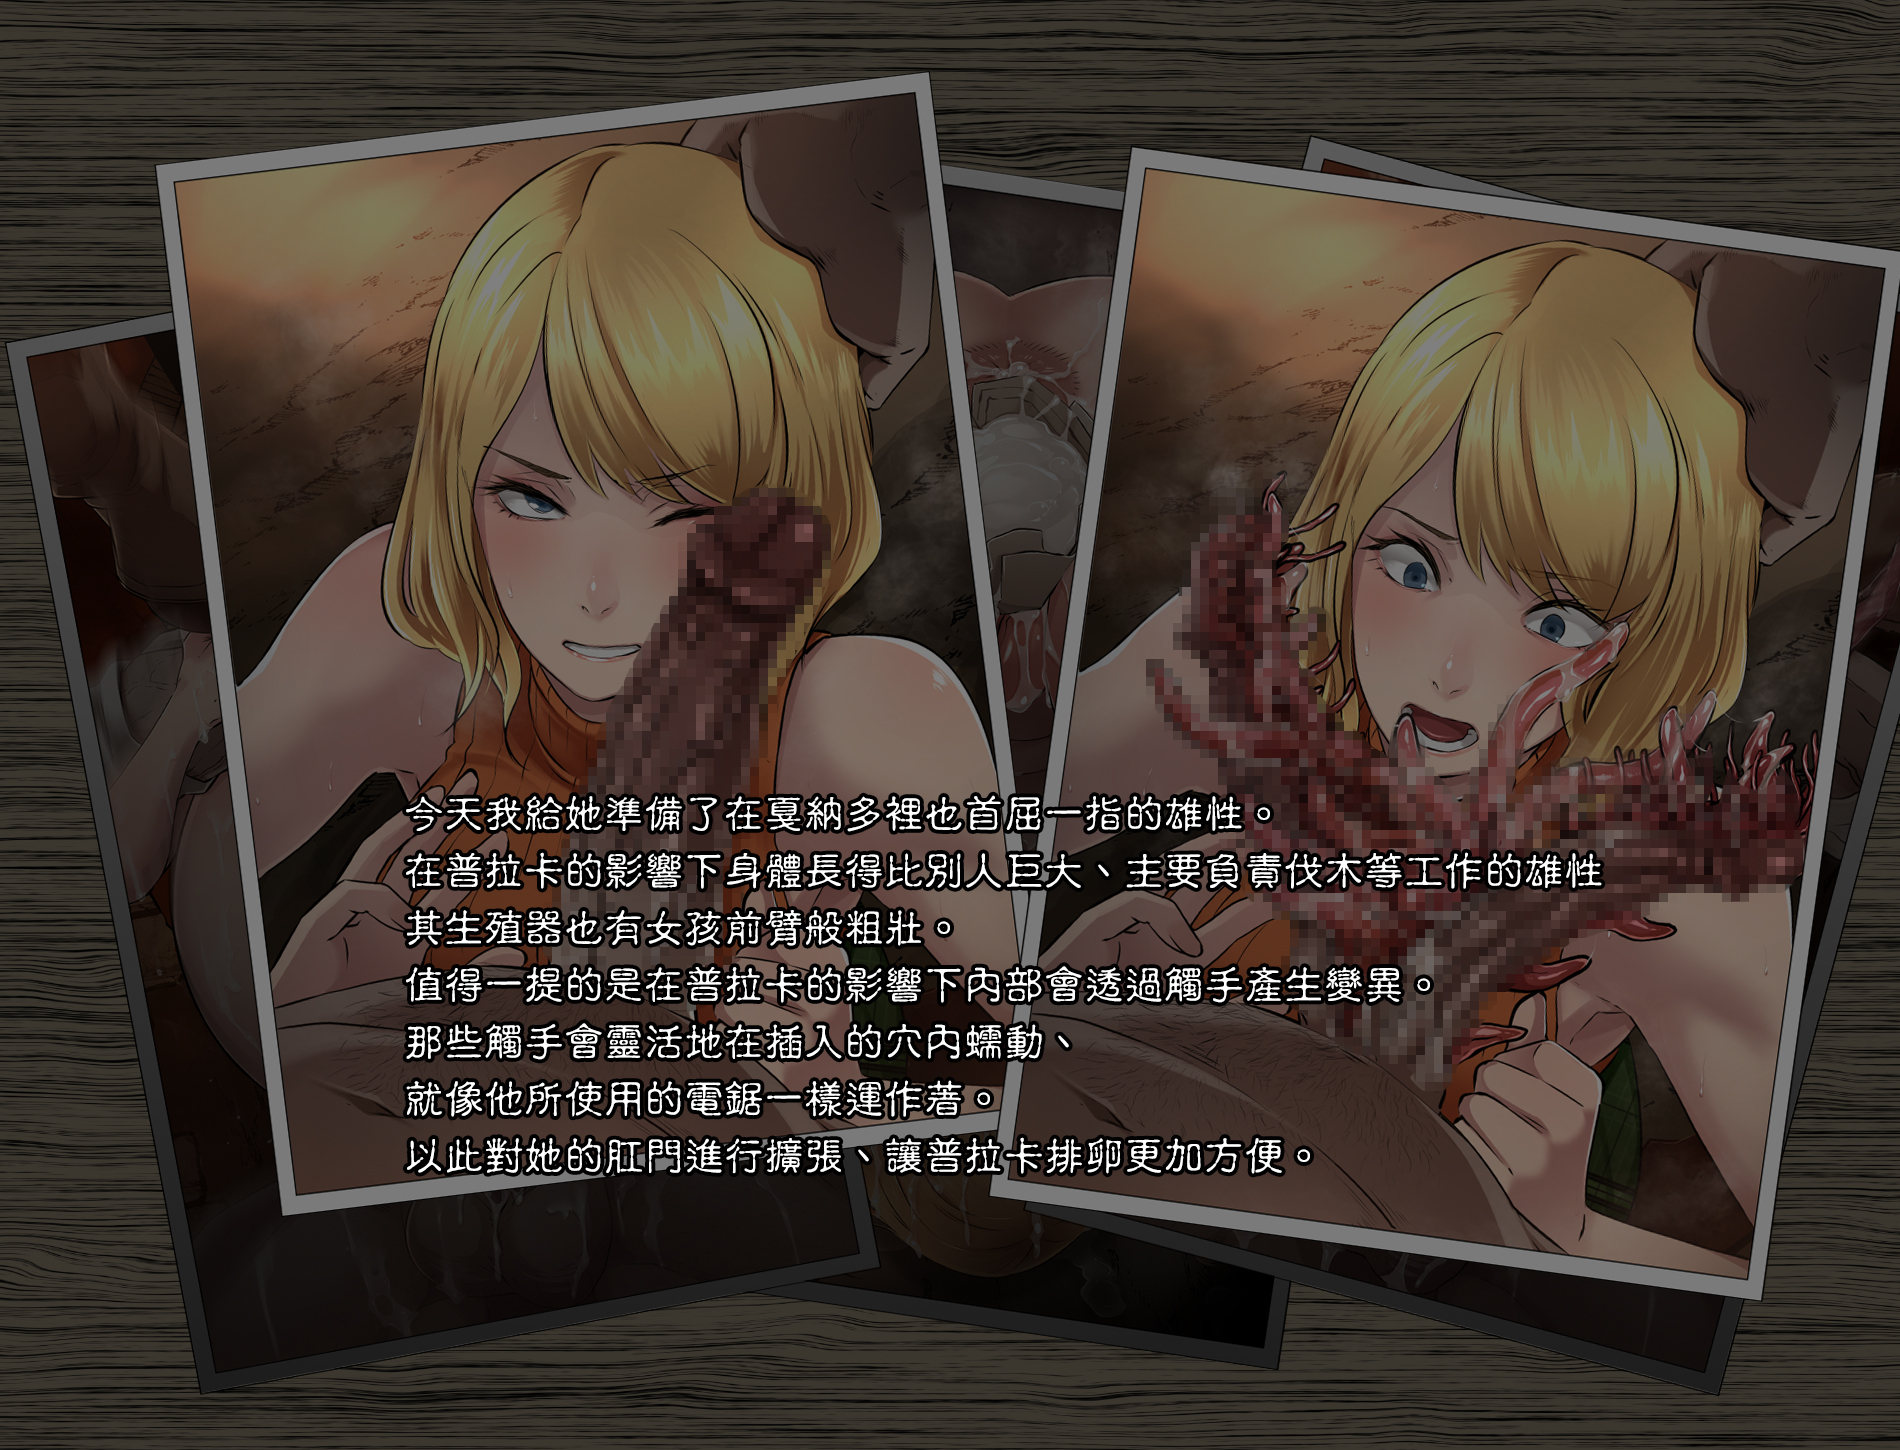 [Butcha-U] GAMEOVERS:RE_FILE01-04 (Resident Evil) [Chinese] [天帝哥個人漢化] - Page 33